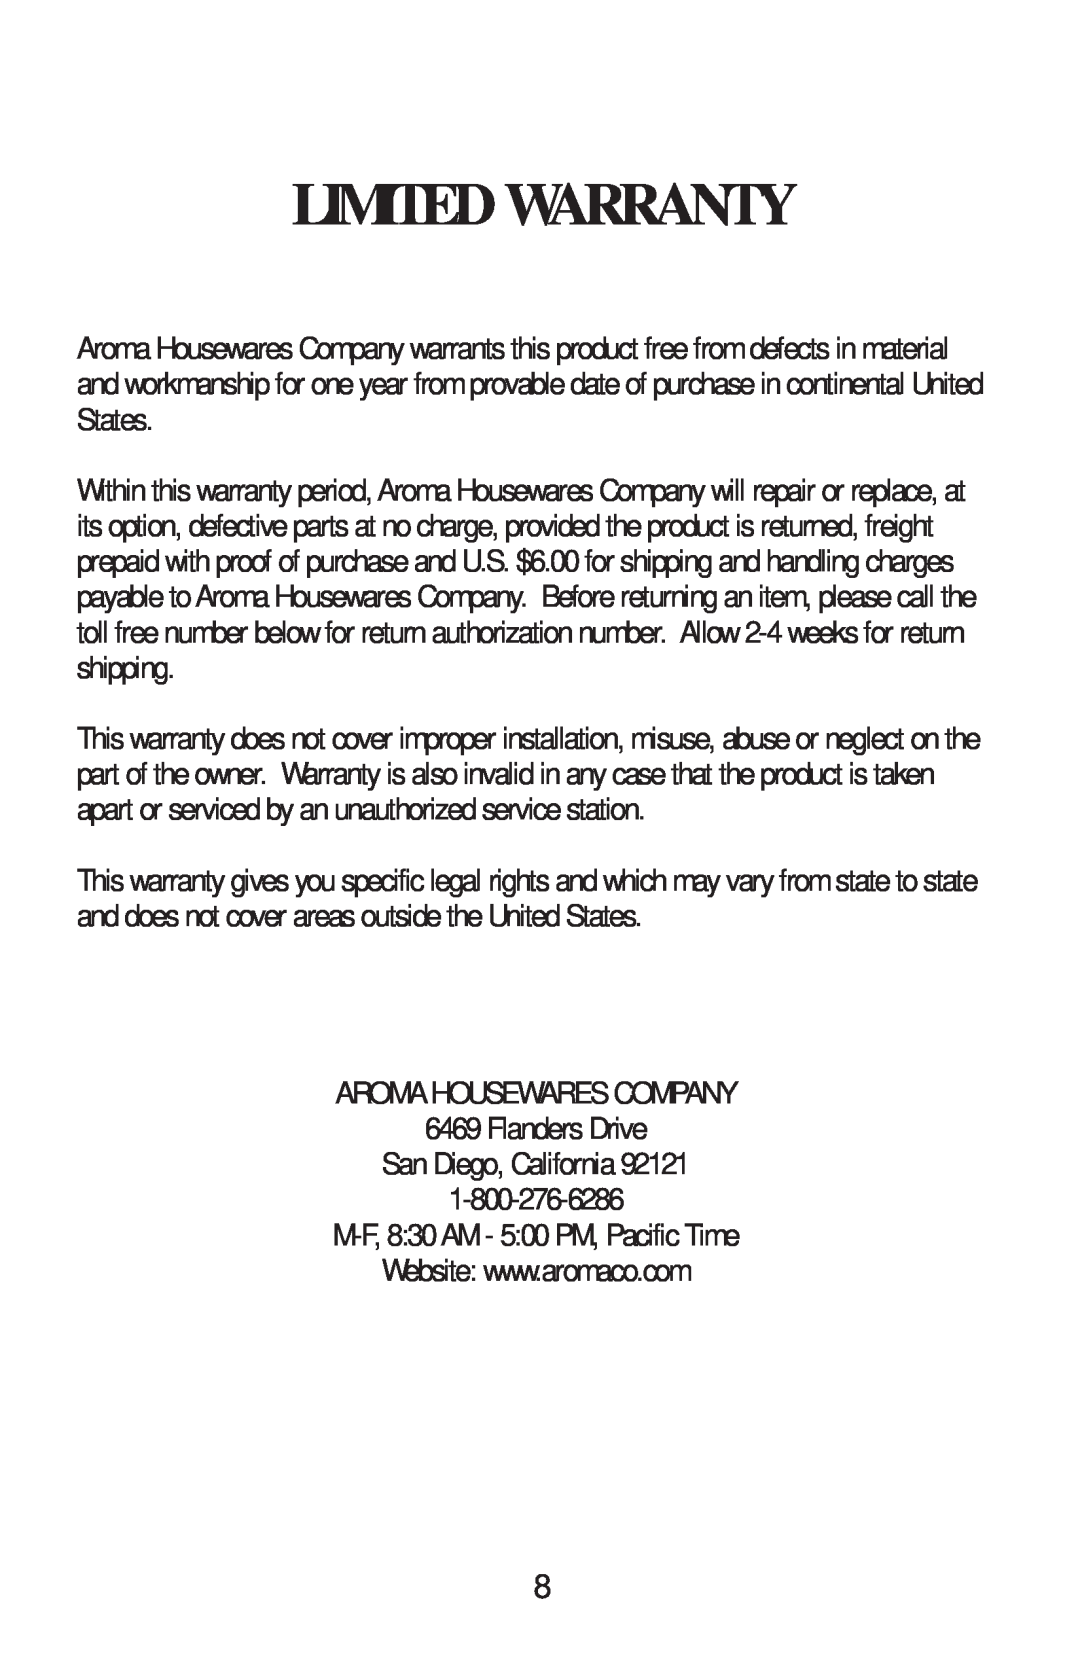 Aroma ABT-103S Limited Warranty, AROMA HOUSEWARES COMPANY 6469 Flanders Drive, M-F,8 30 AM - 5 00 PM, Pacific Time 